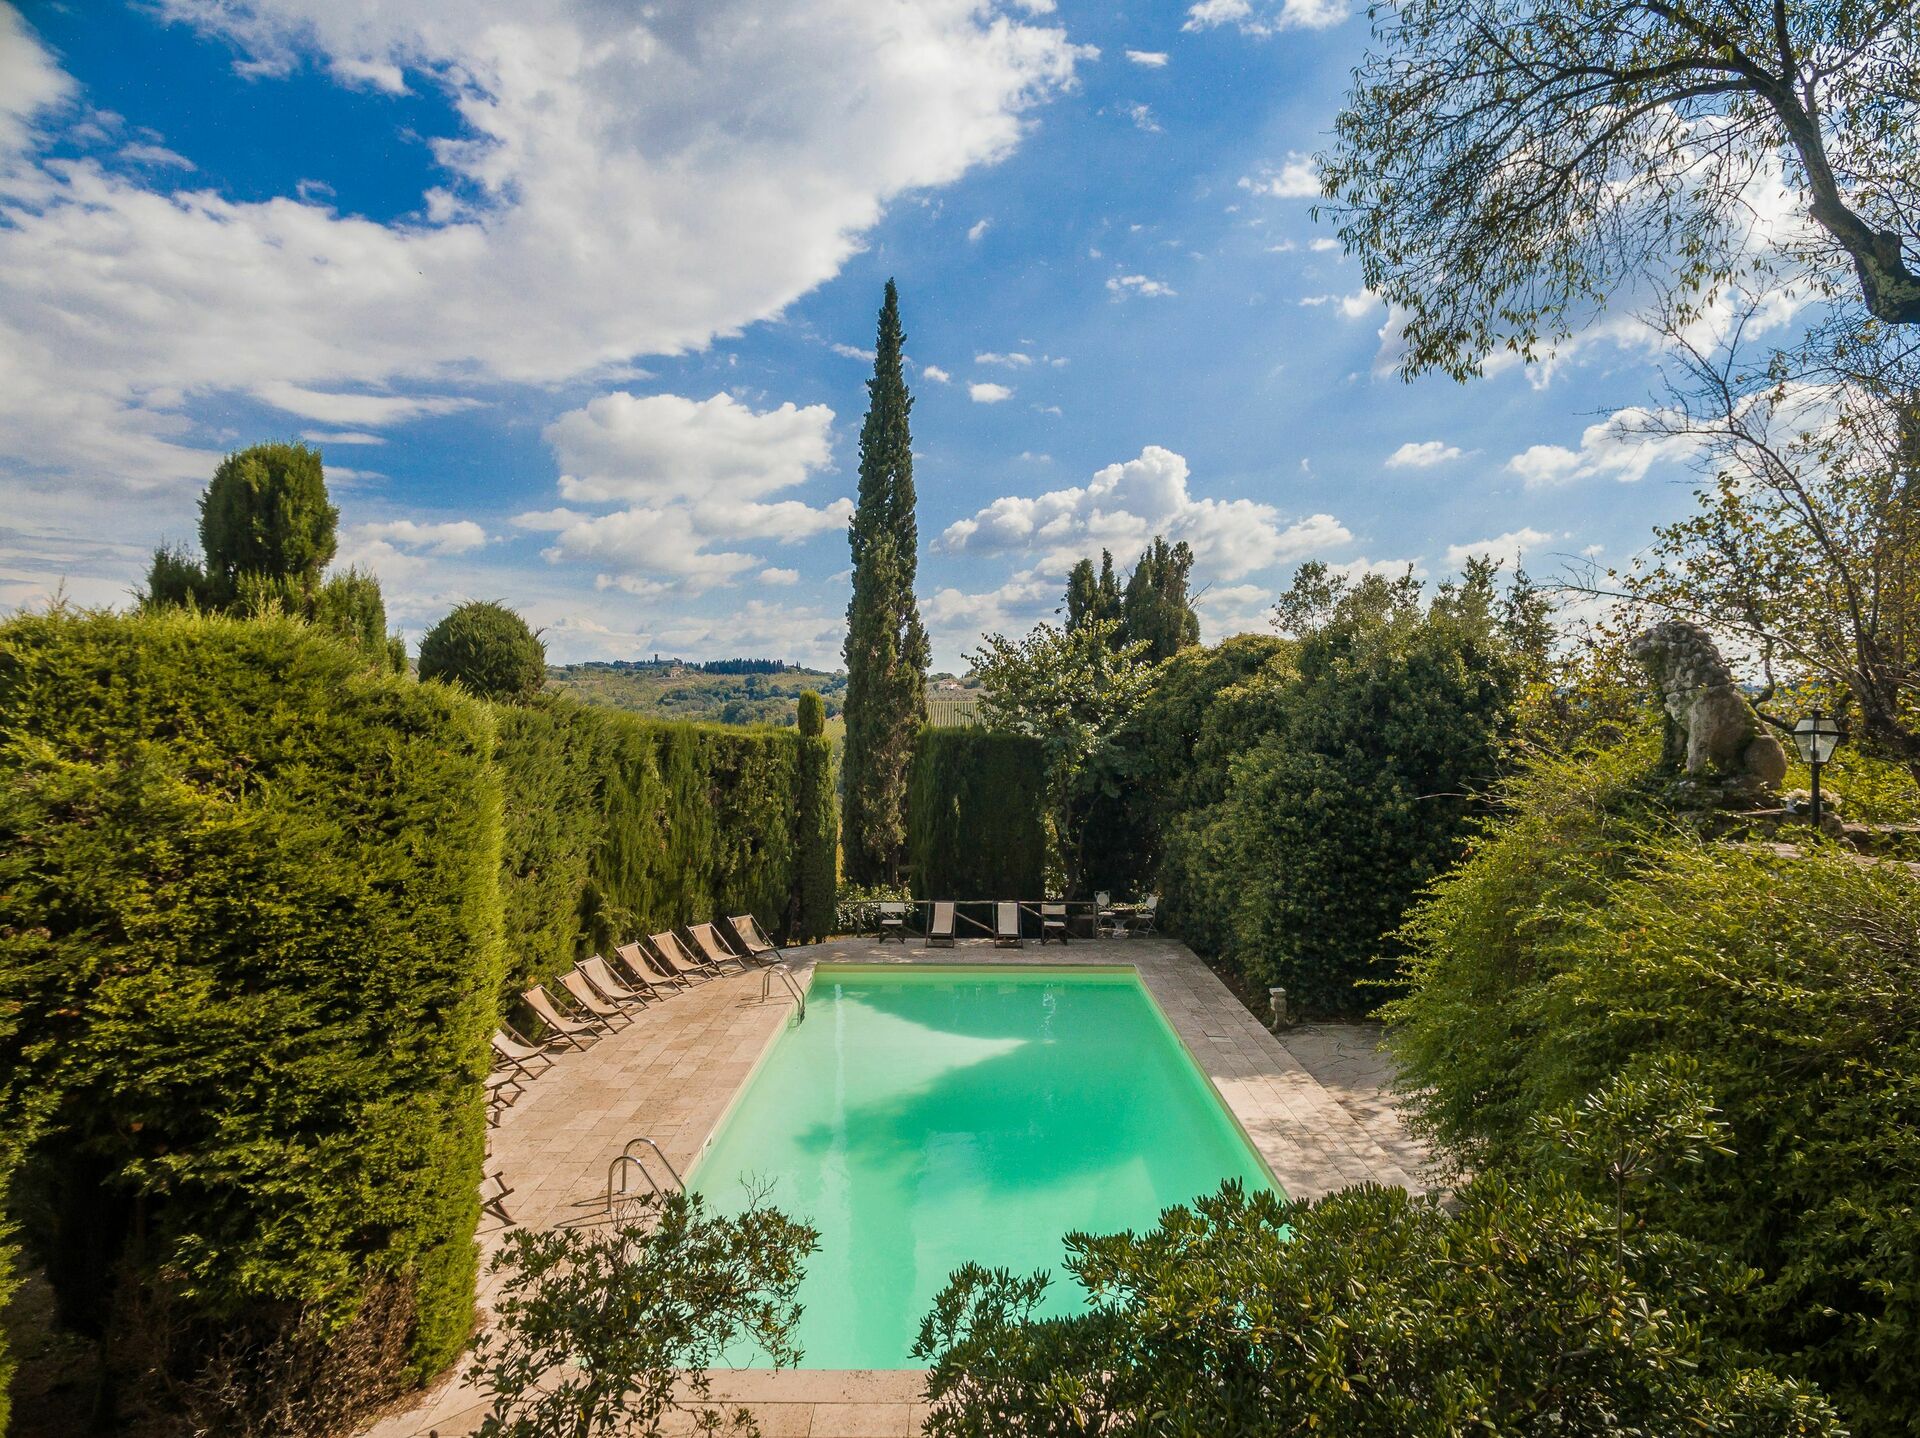 Pool at Montegufoni Castle near Florence